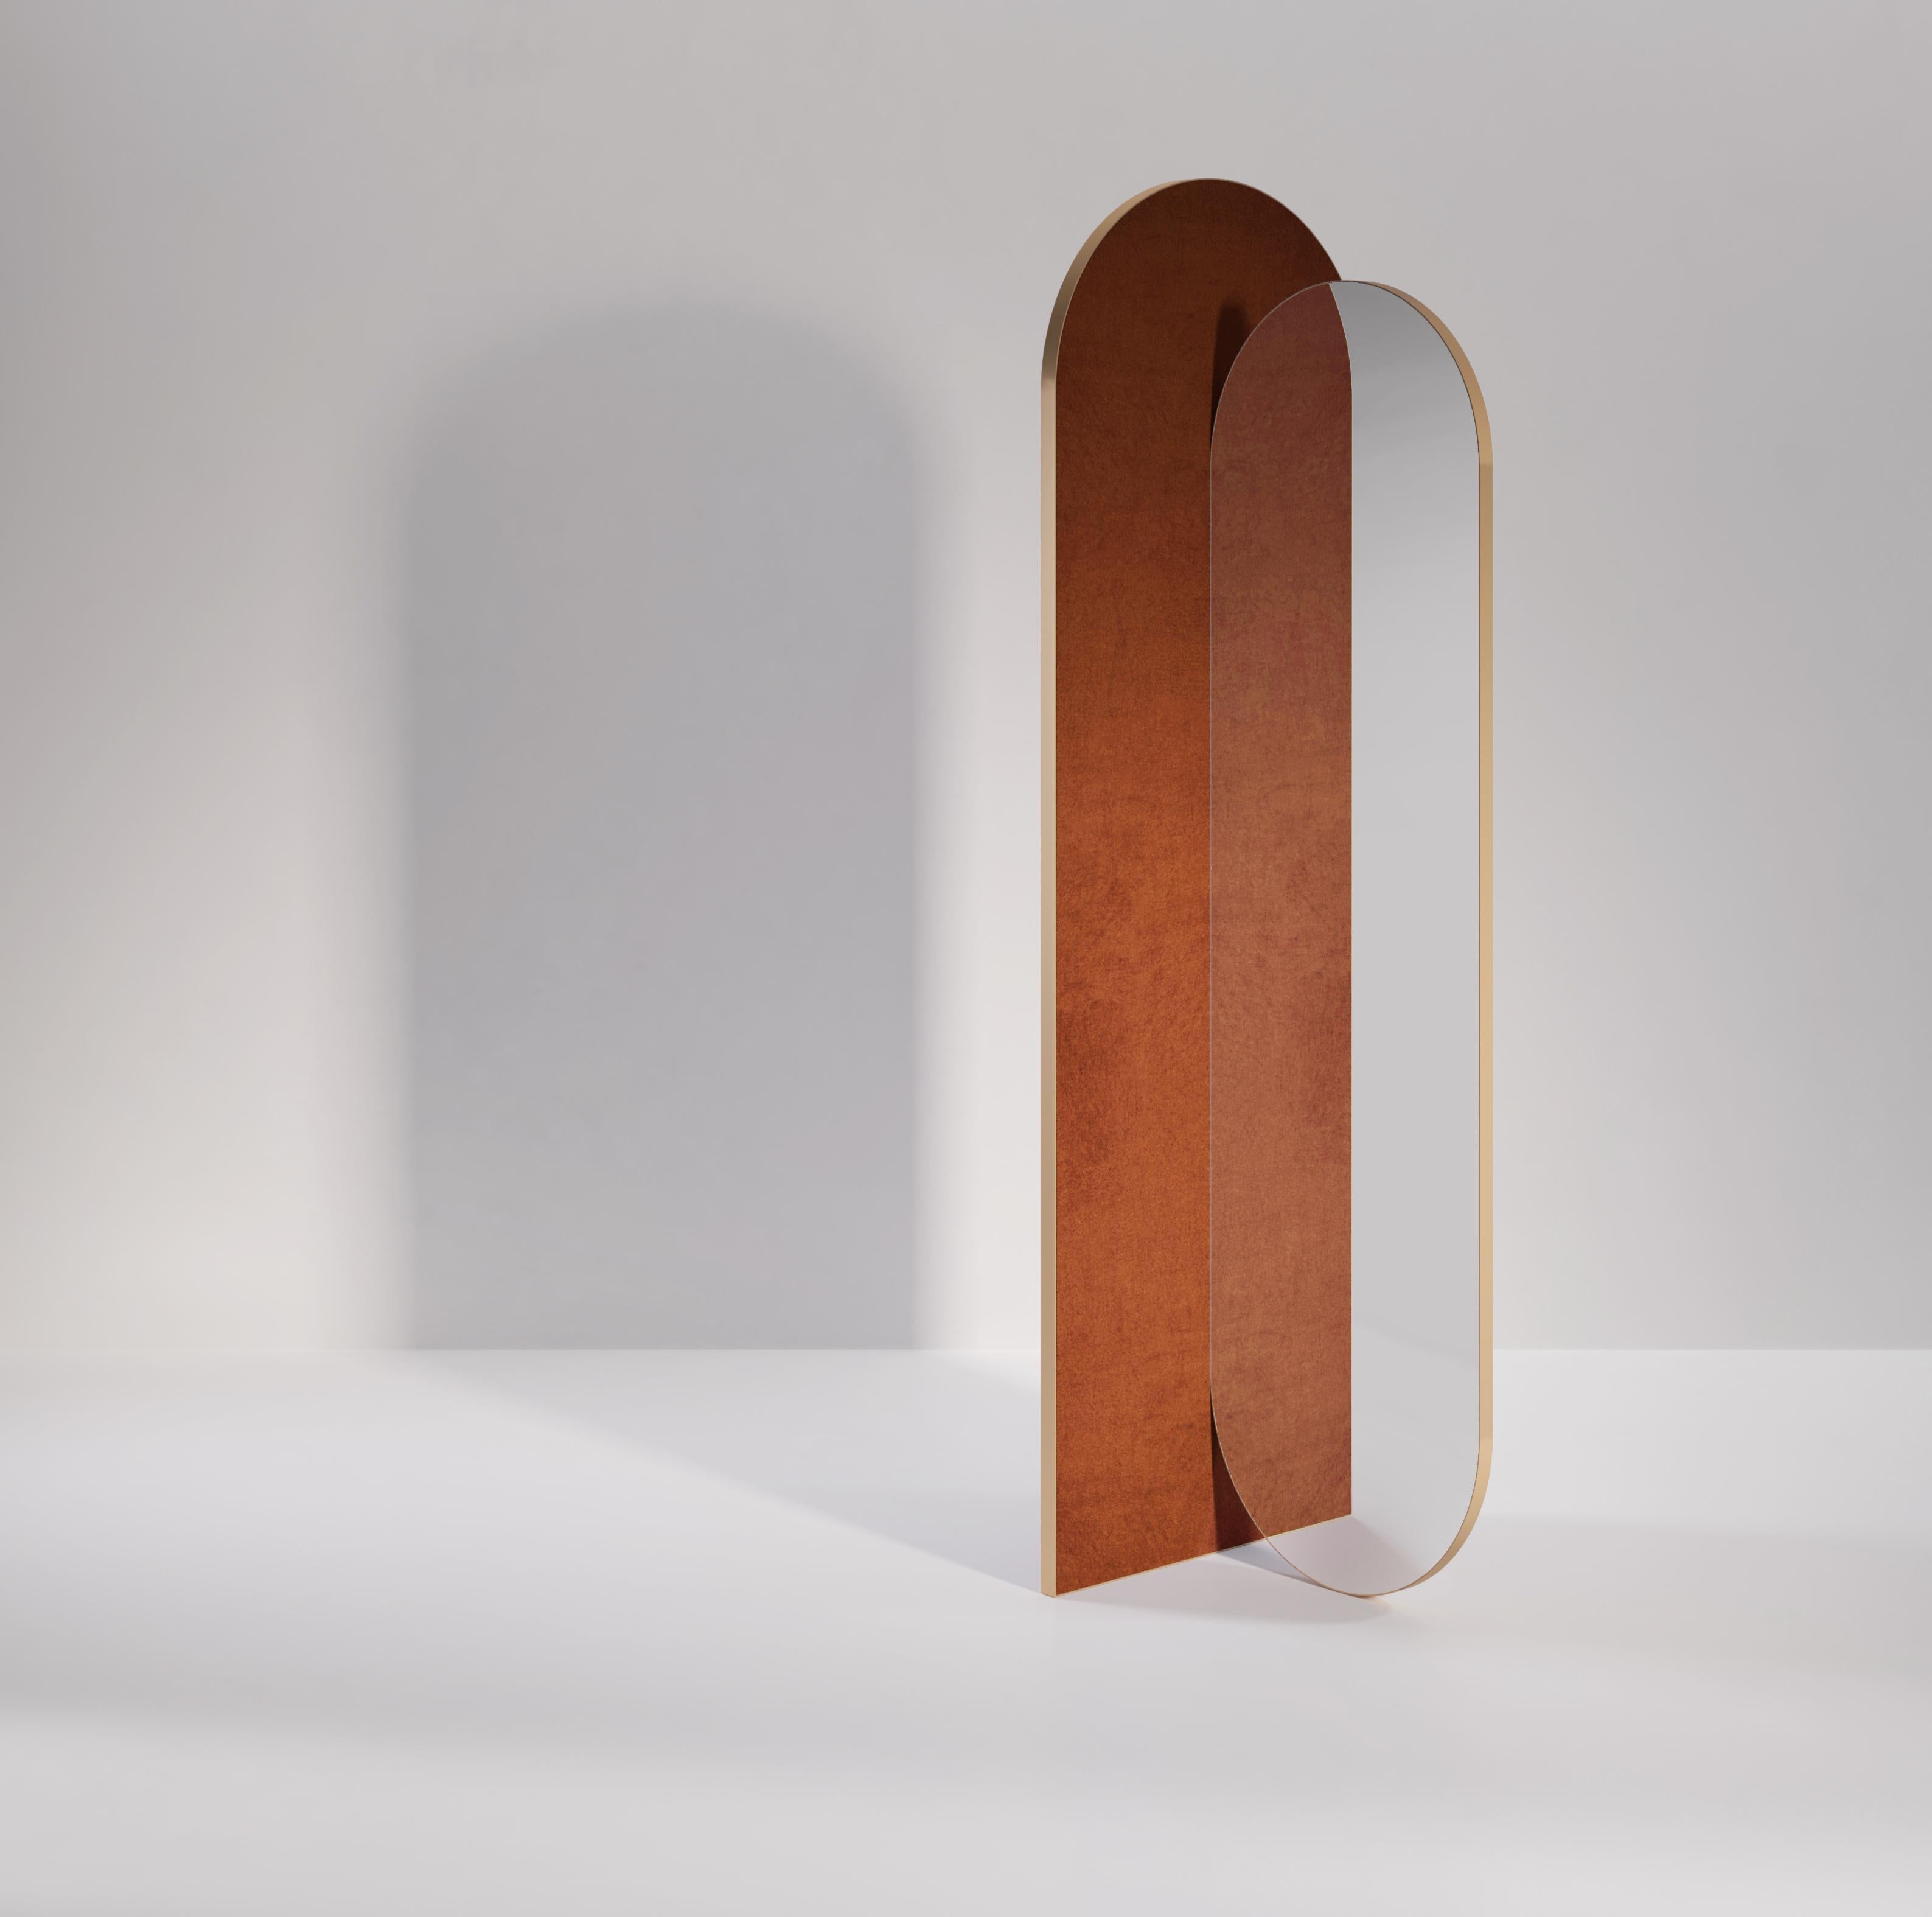 The Takada mirror is a round top and bottomed mirror, made stable only by its connection to a separate, supporting arch. Both the mirror and arch are wrapped in a metal band which can be brass or any other metal finish. The back of the mirror and